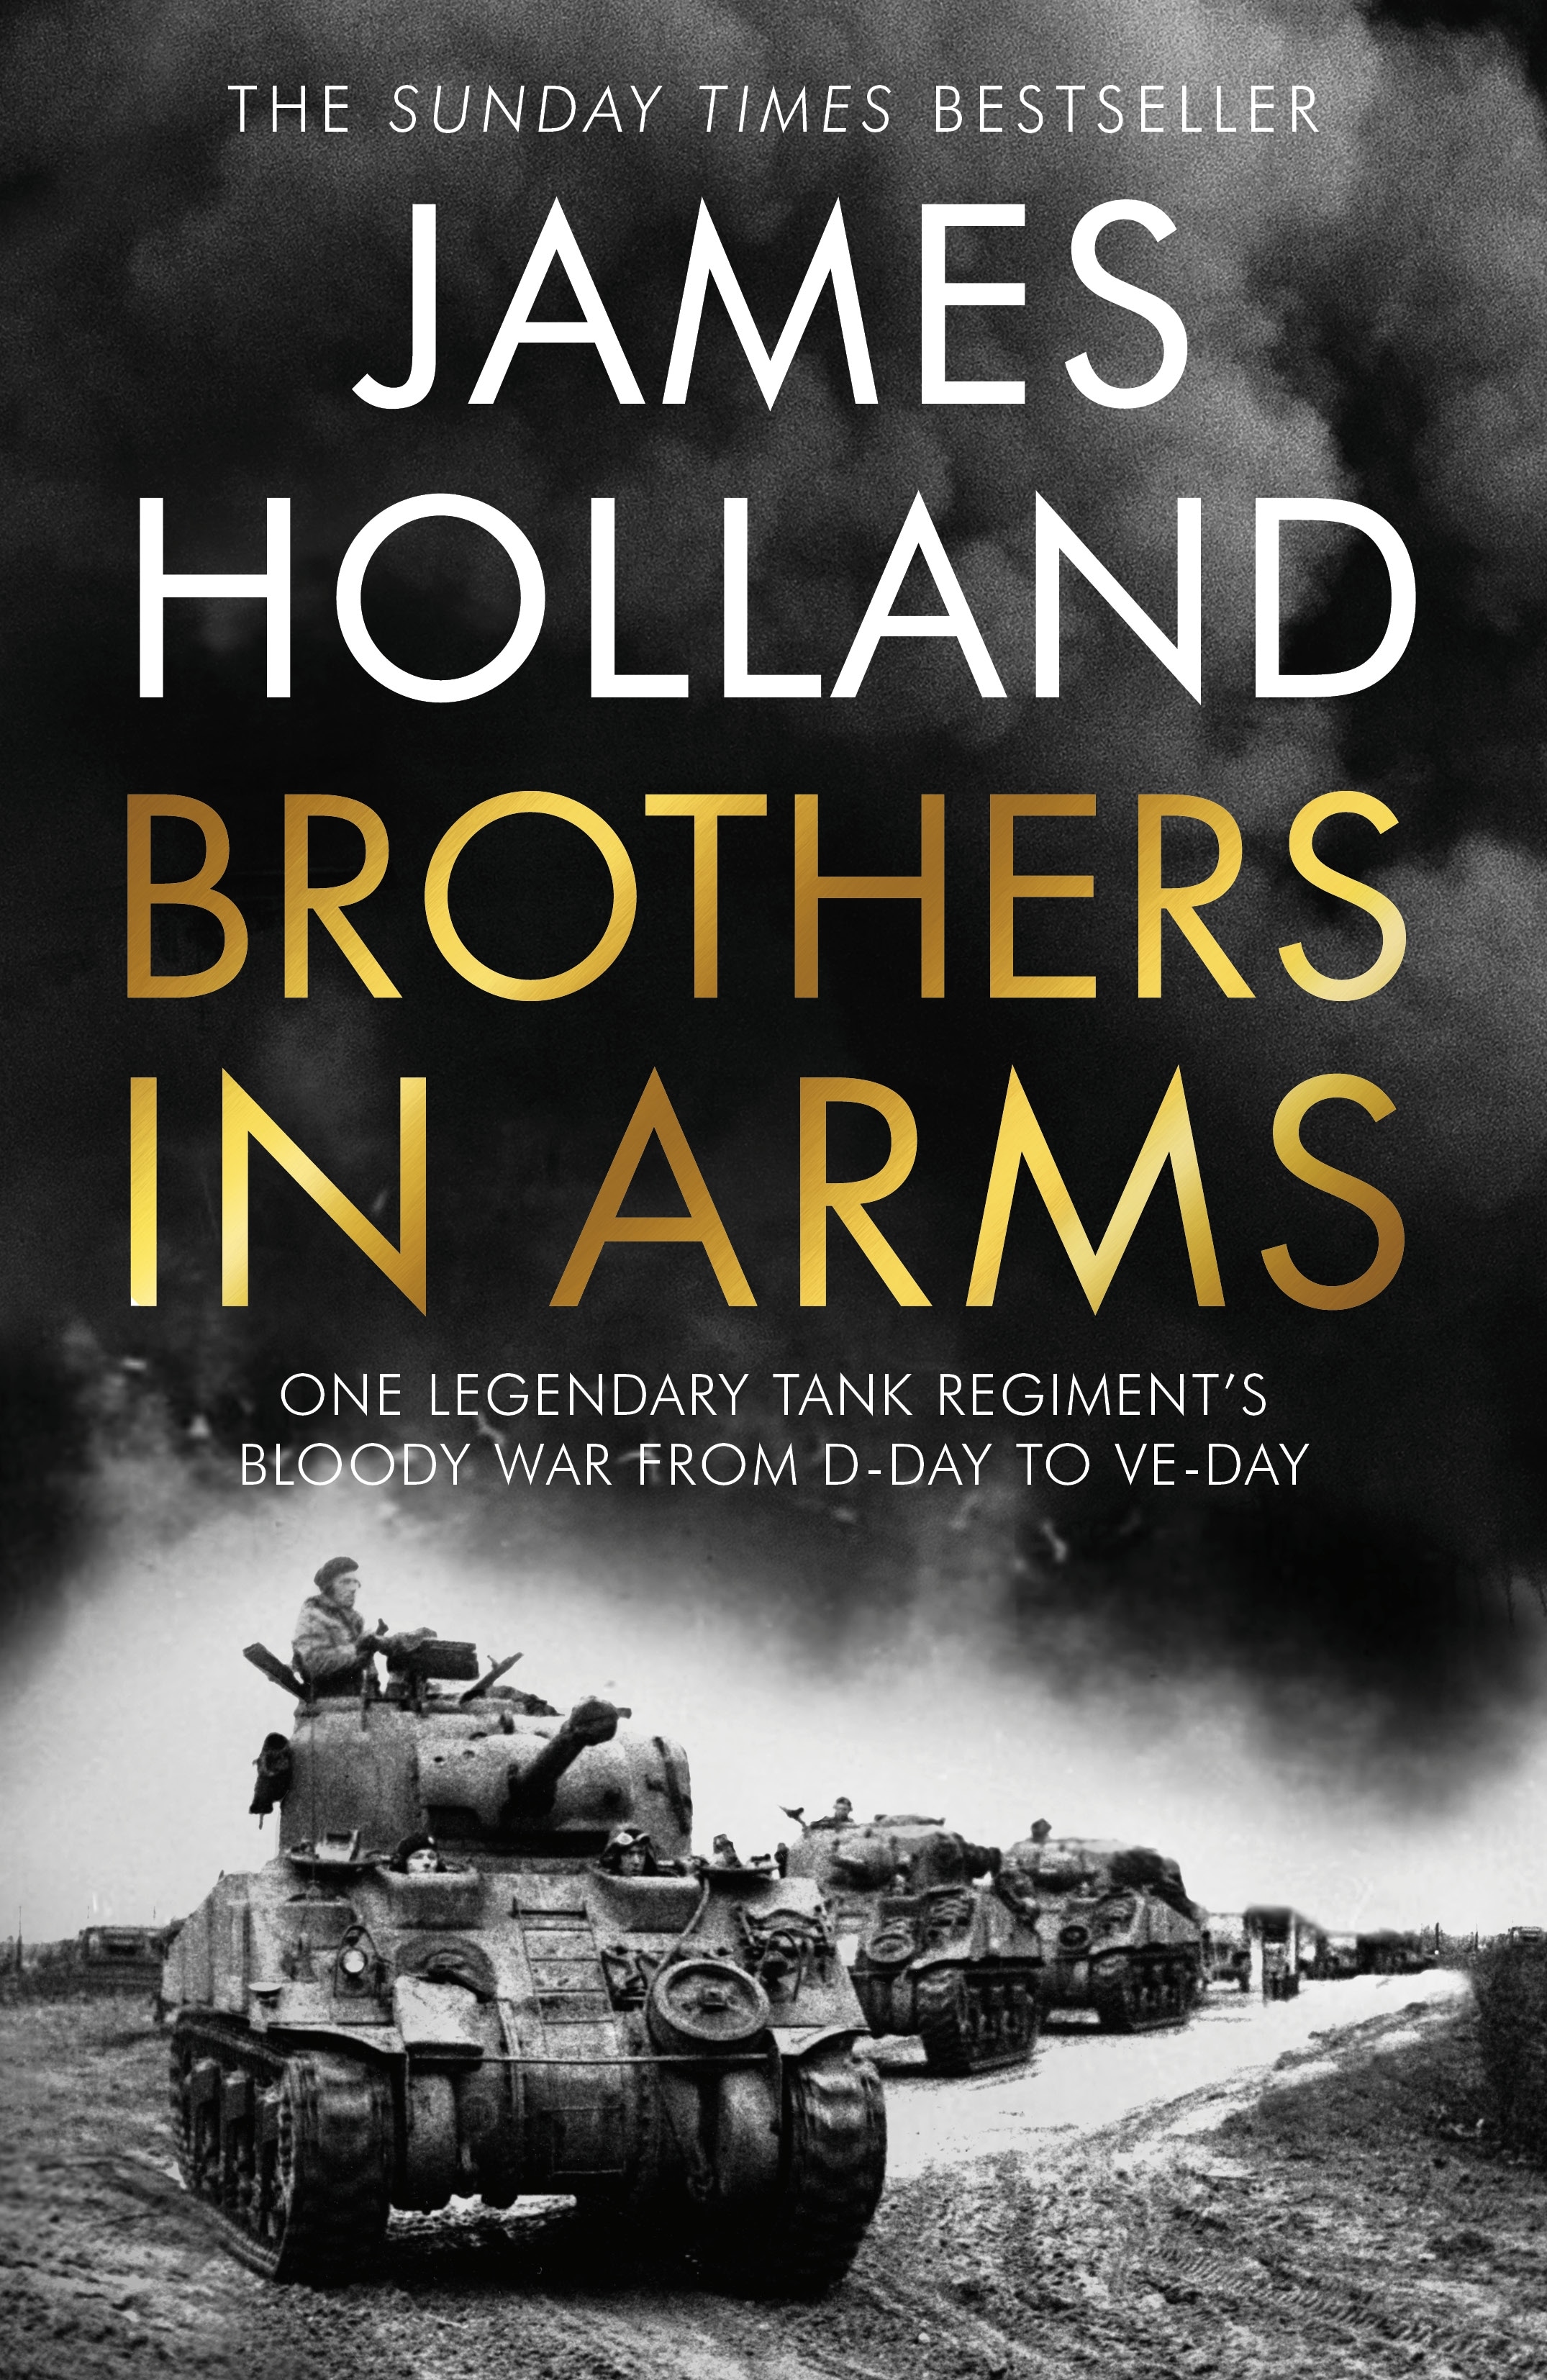 Book “Brothers in Arms” by James Holland — September 30, 2021